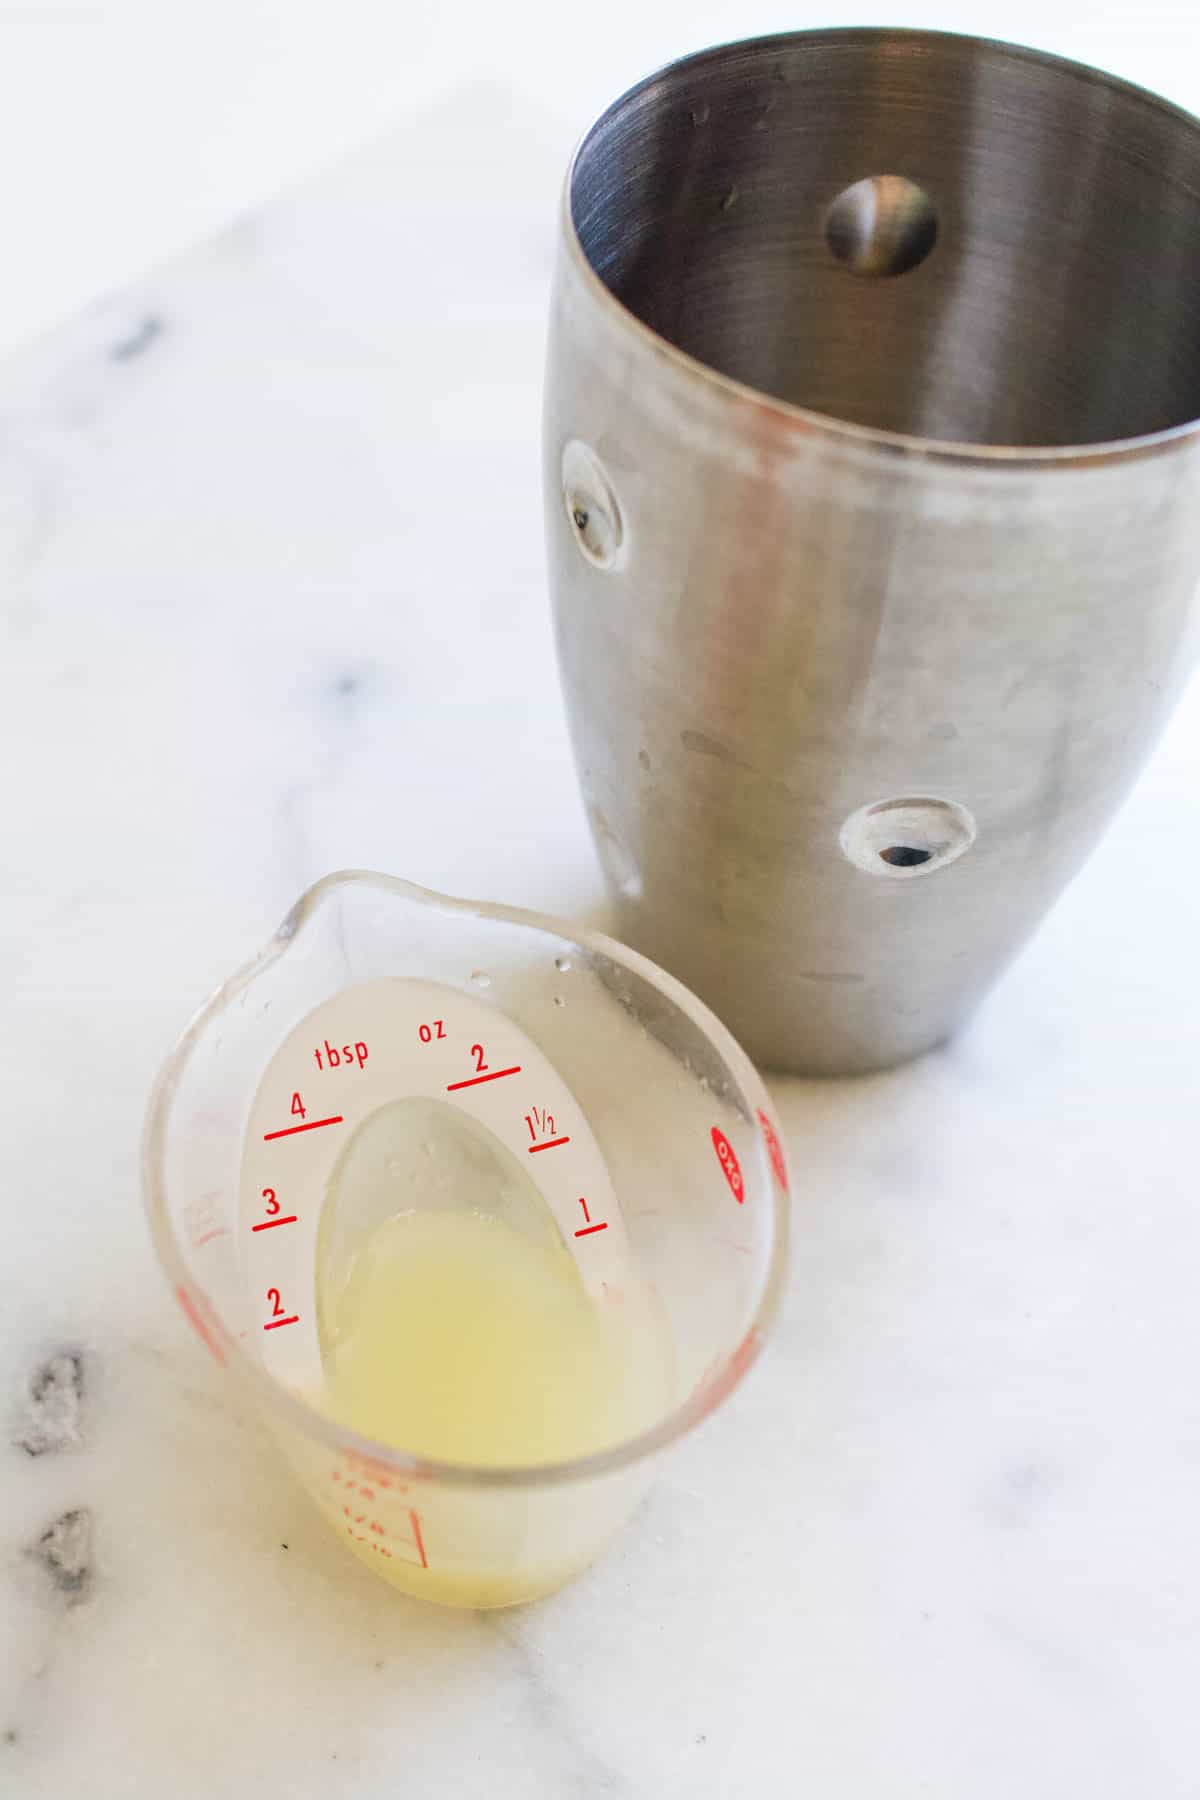 Cocktail shaker next to a liquid measuring cup with lime juice.